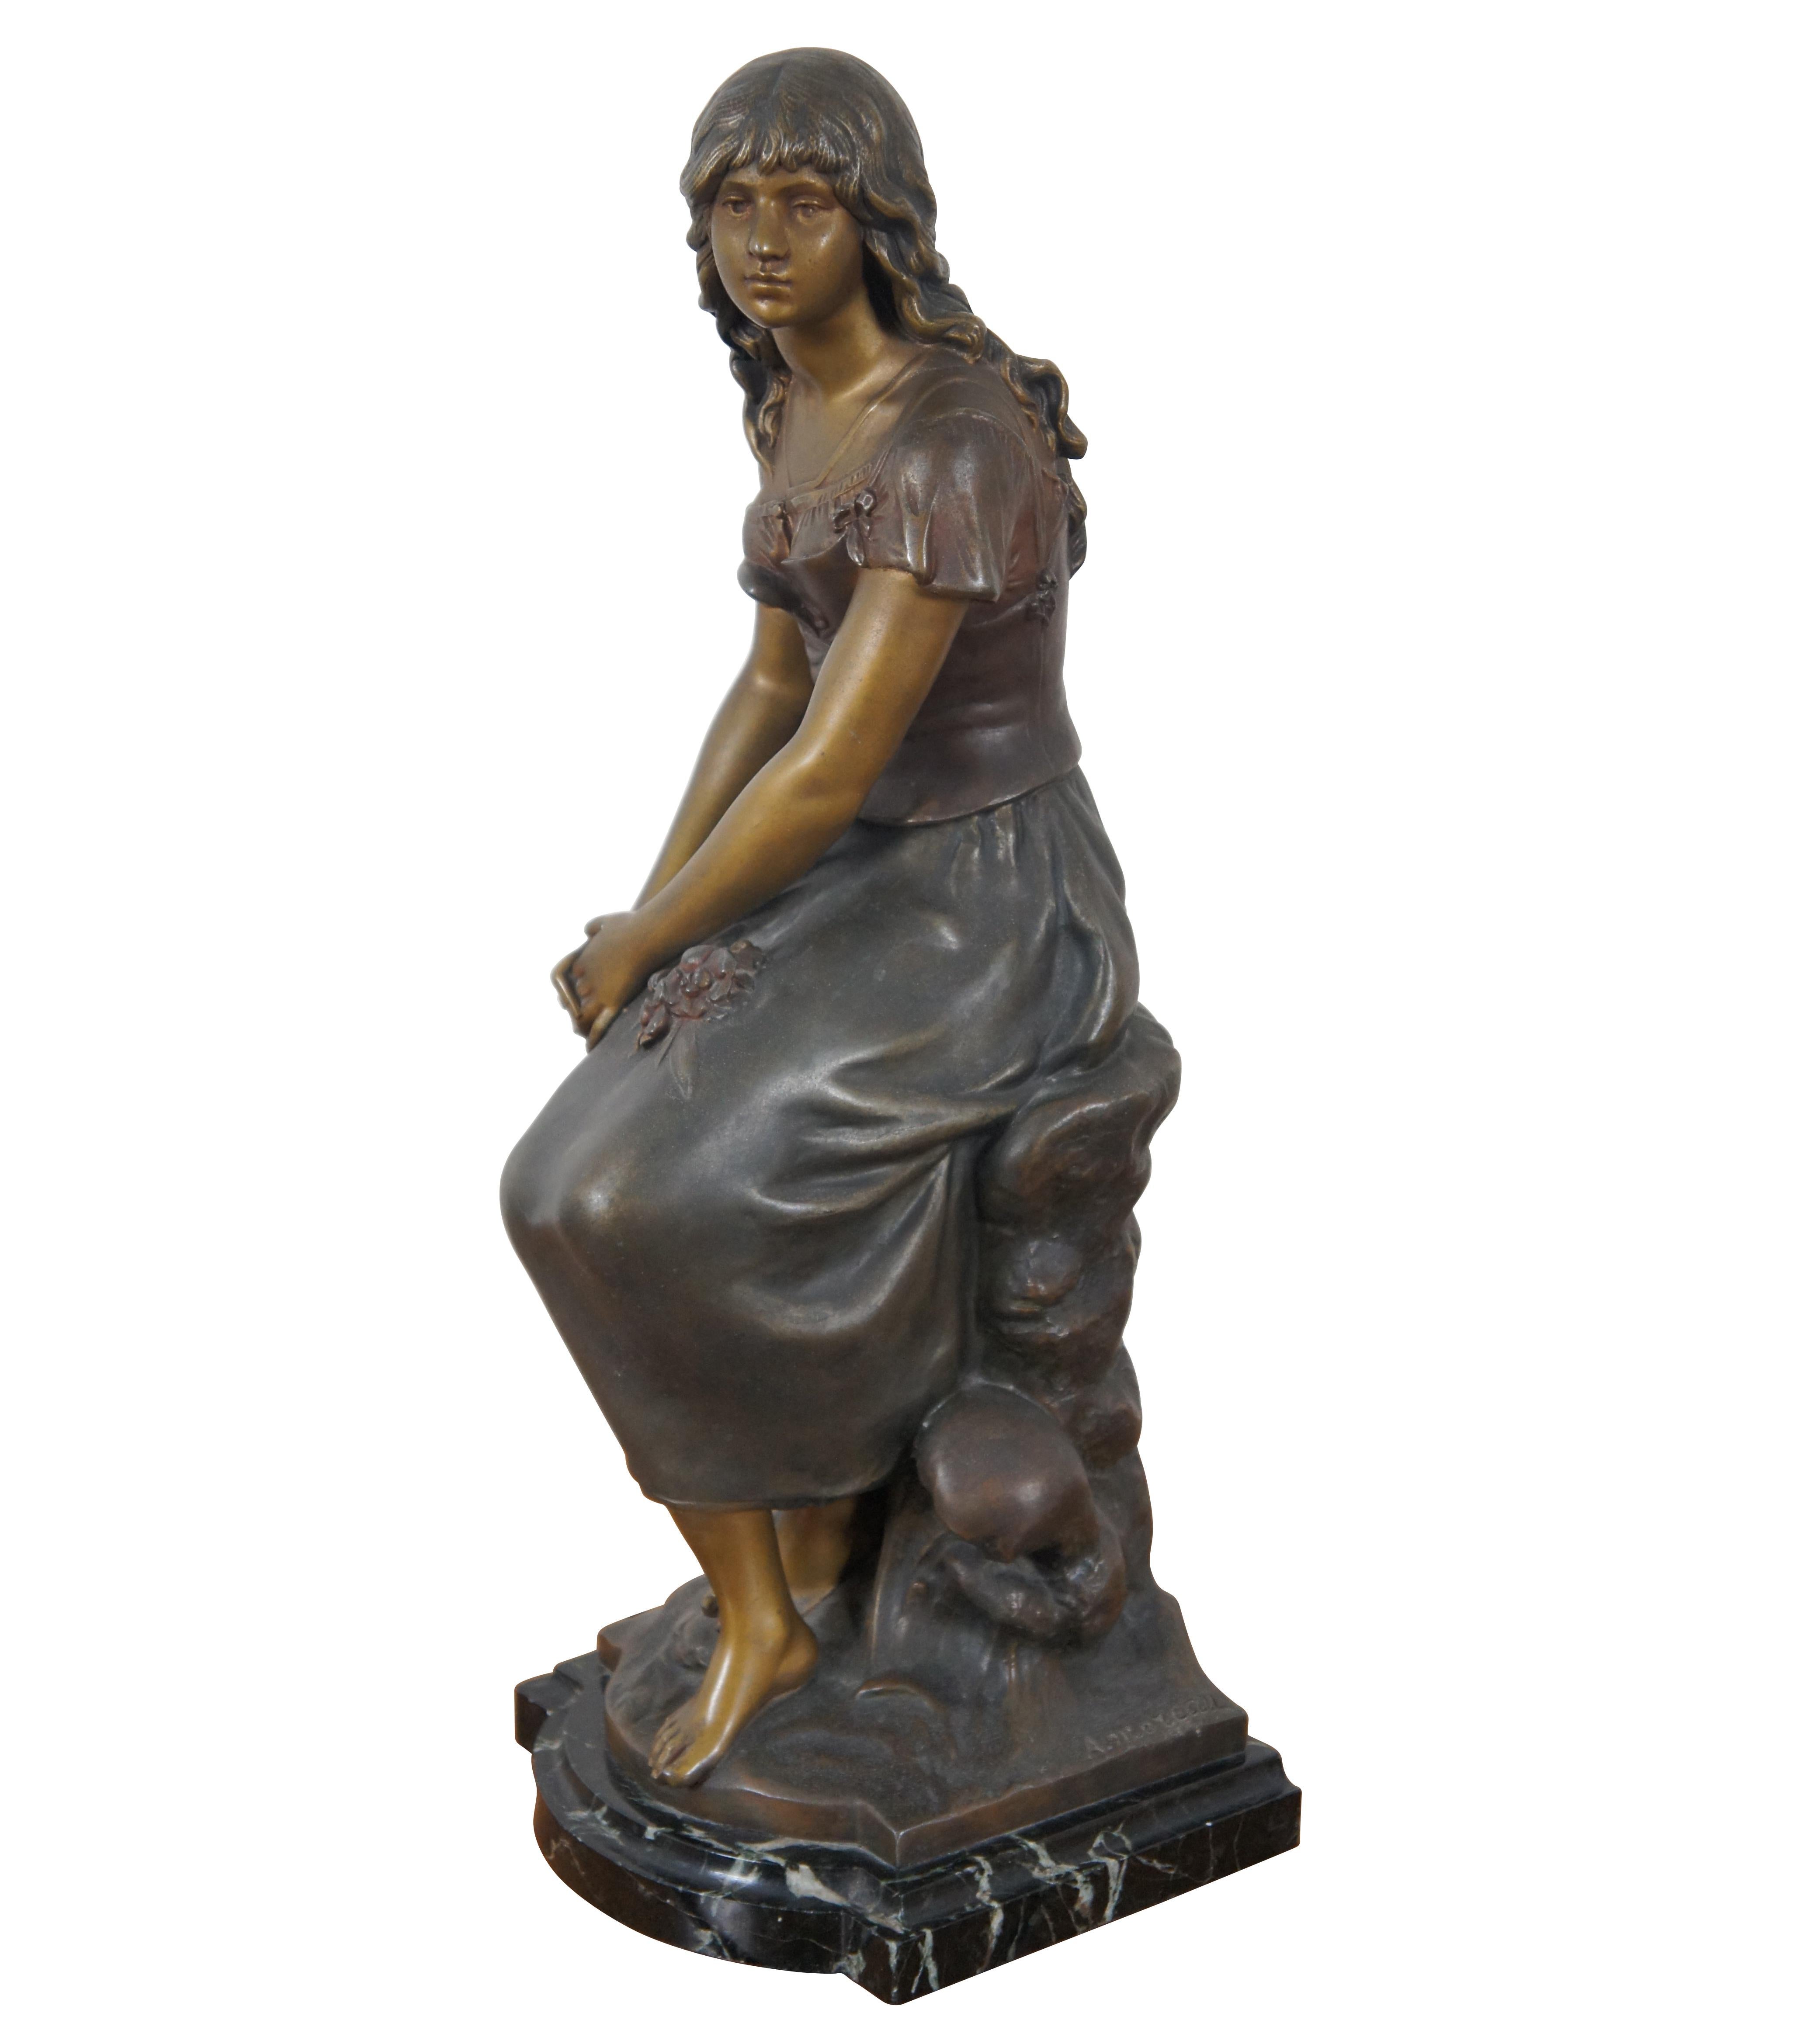 Antique bronze sculpture with beautiful patina, mounted on a black marble base, portraying the seated figure of a young woman in pastoral garb with flowers in her lap, designed by A. Moreau. Made in Paris, France.

Auguste Moreau (1834 – 1917) was